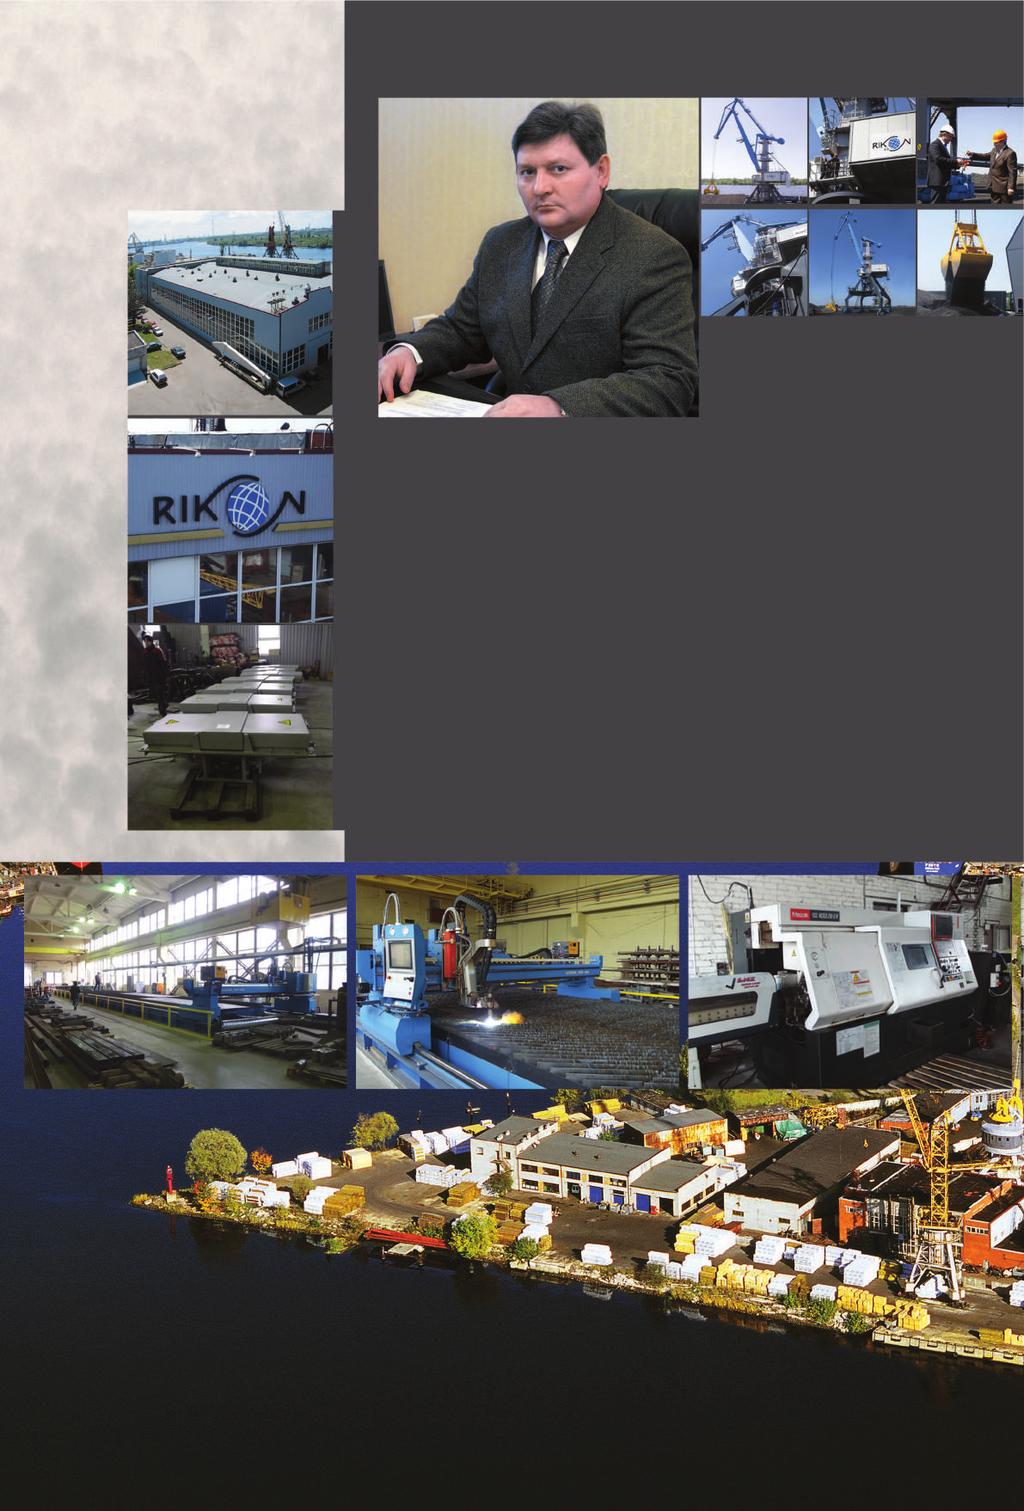 A.A. Bashkankov Chairman Of The Board of JSC RIKON The manufacture of equipment for ports has characterised the history of today s company JSC RIKON.